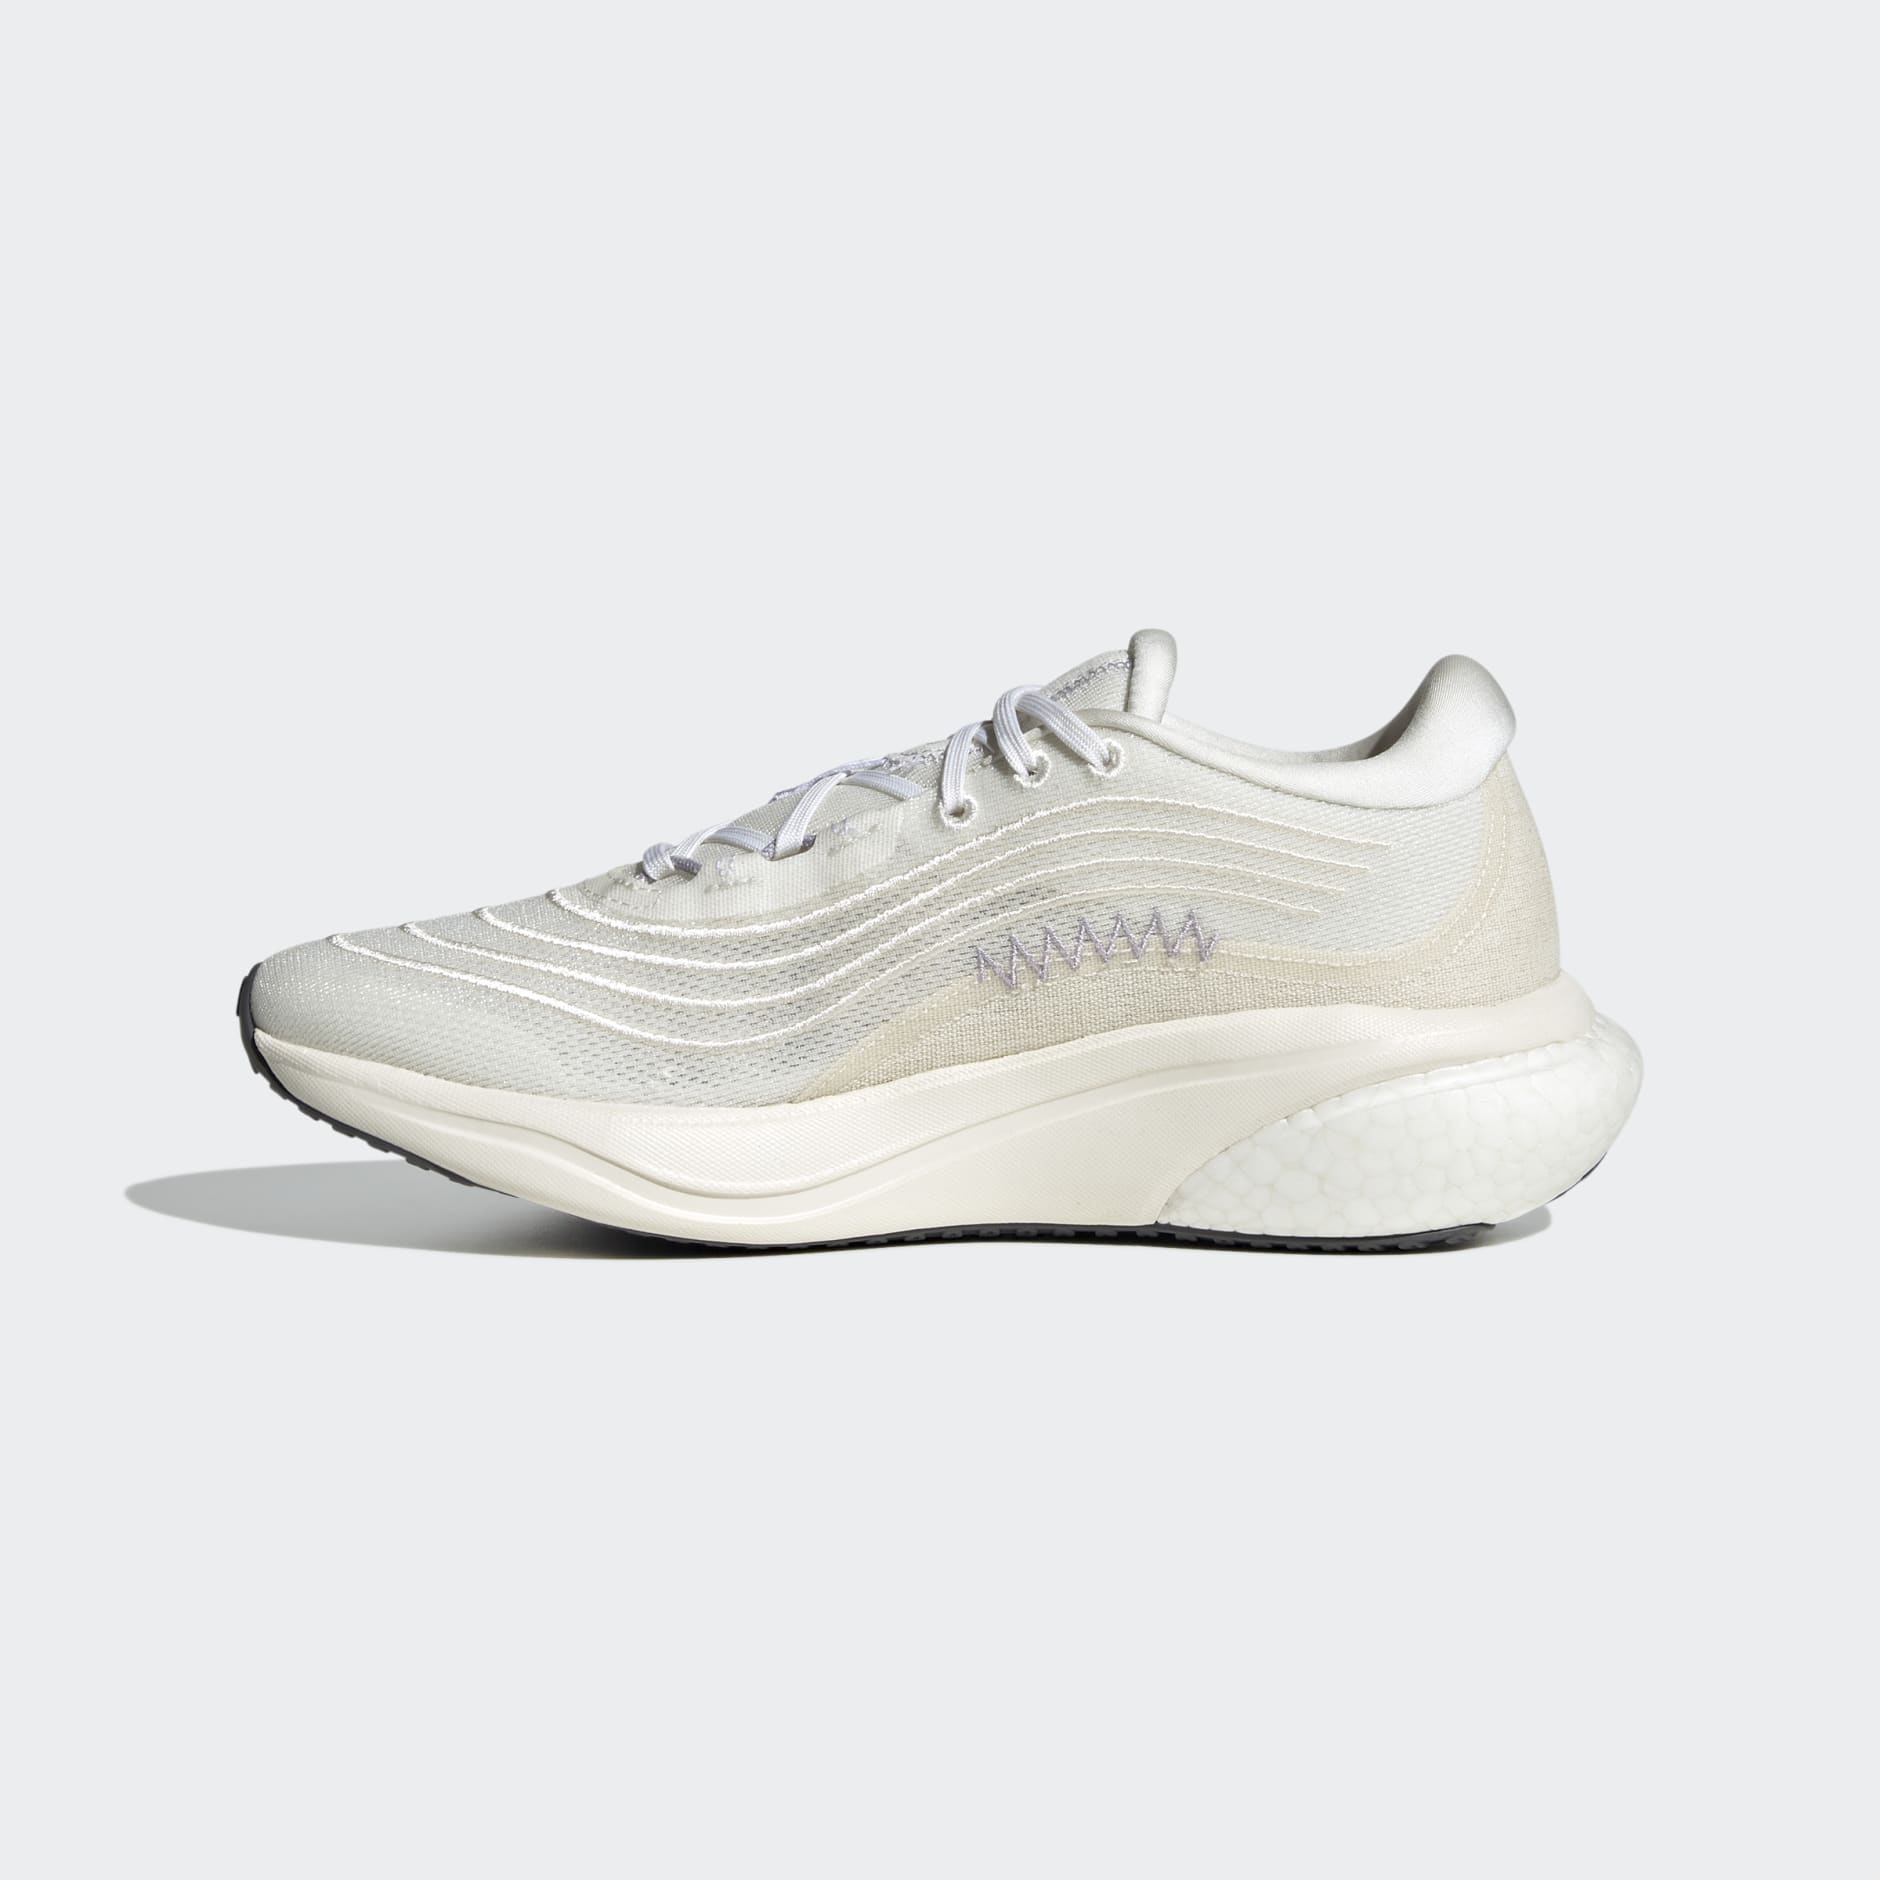 Shoes - Supernova 2.0 x Parley Shoes - White | adidas South Africa